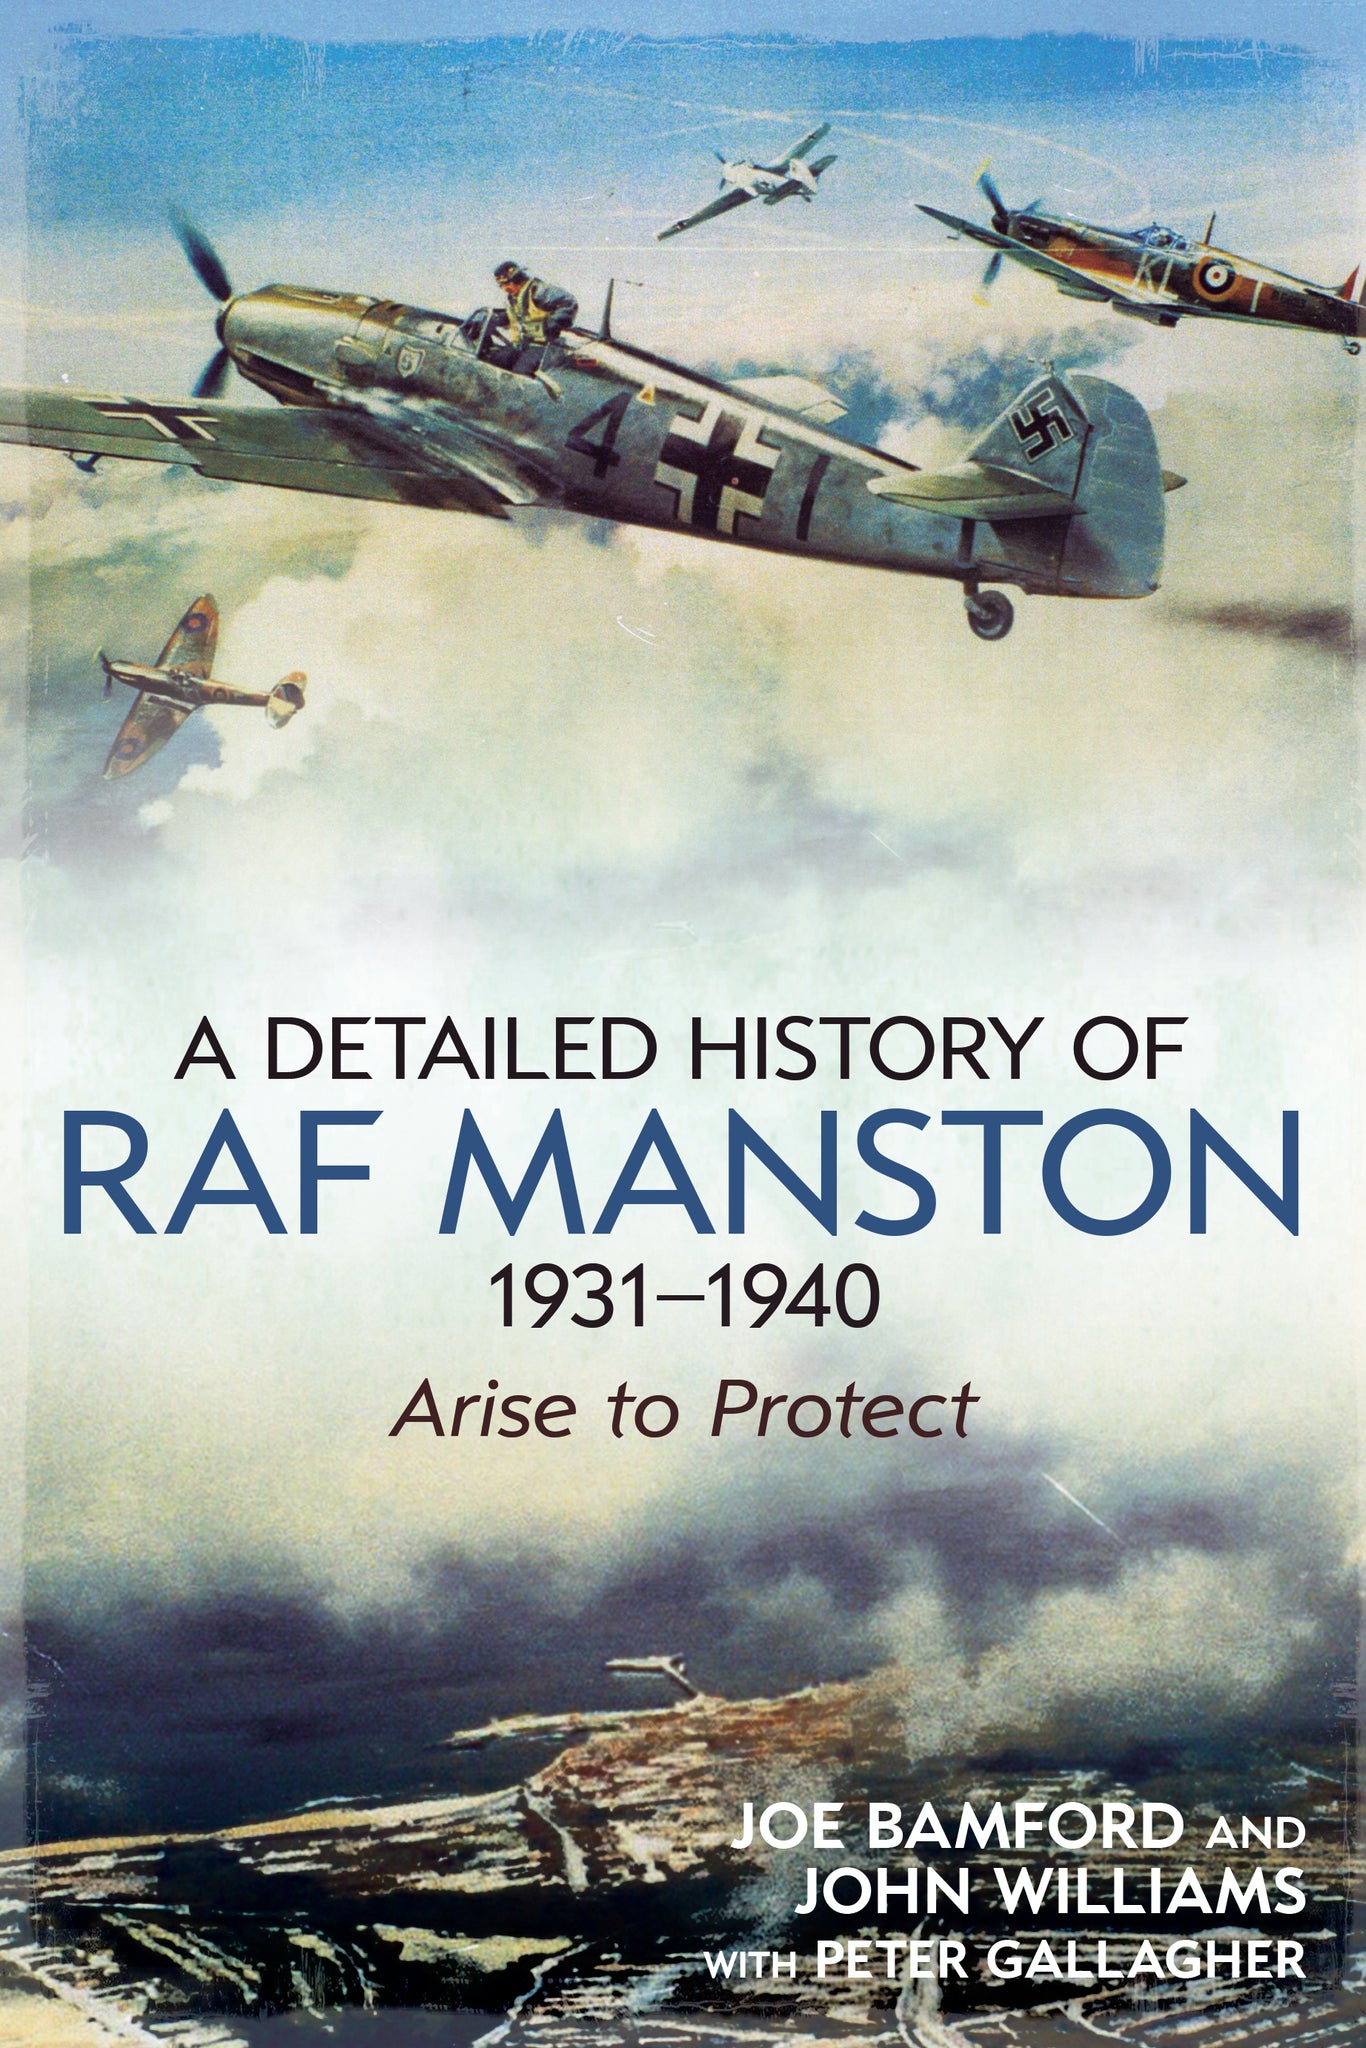 A Detailed History of RAF Manston - available now from Fonthill Media